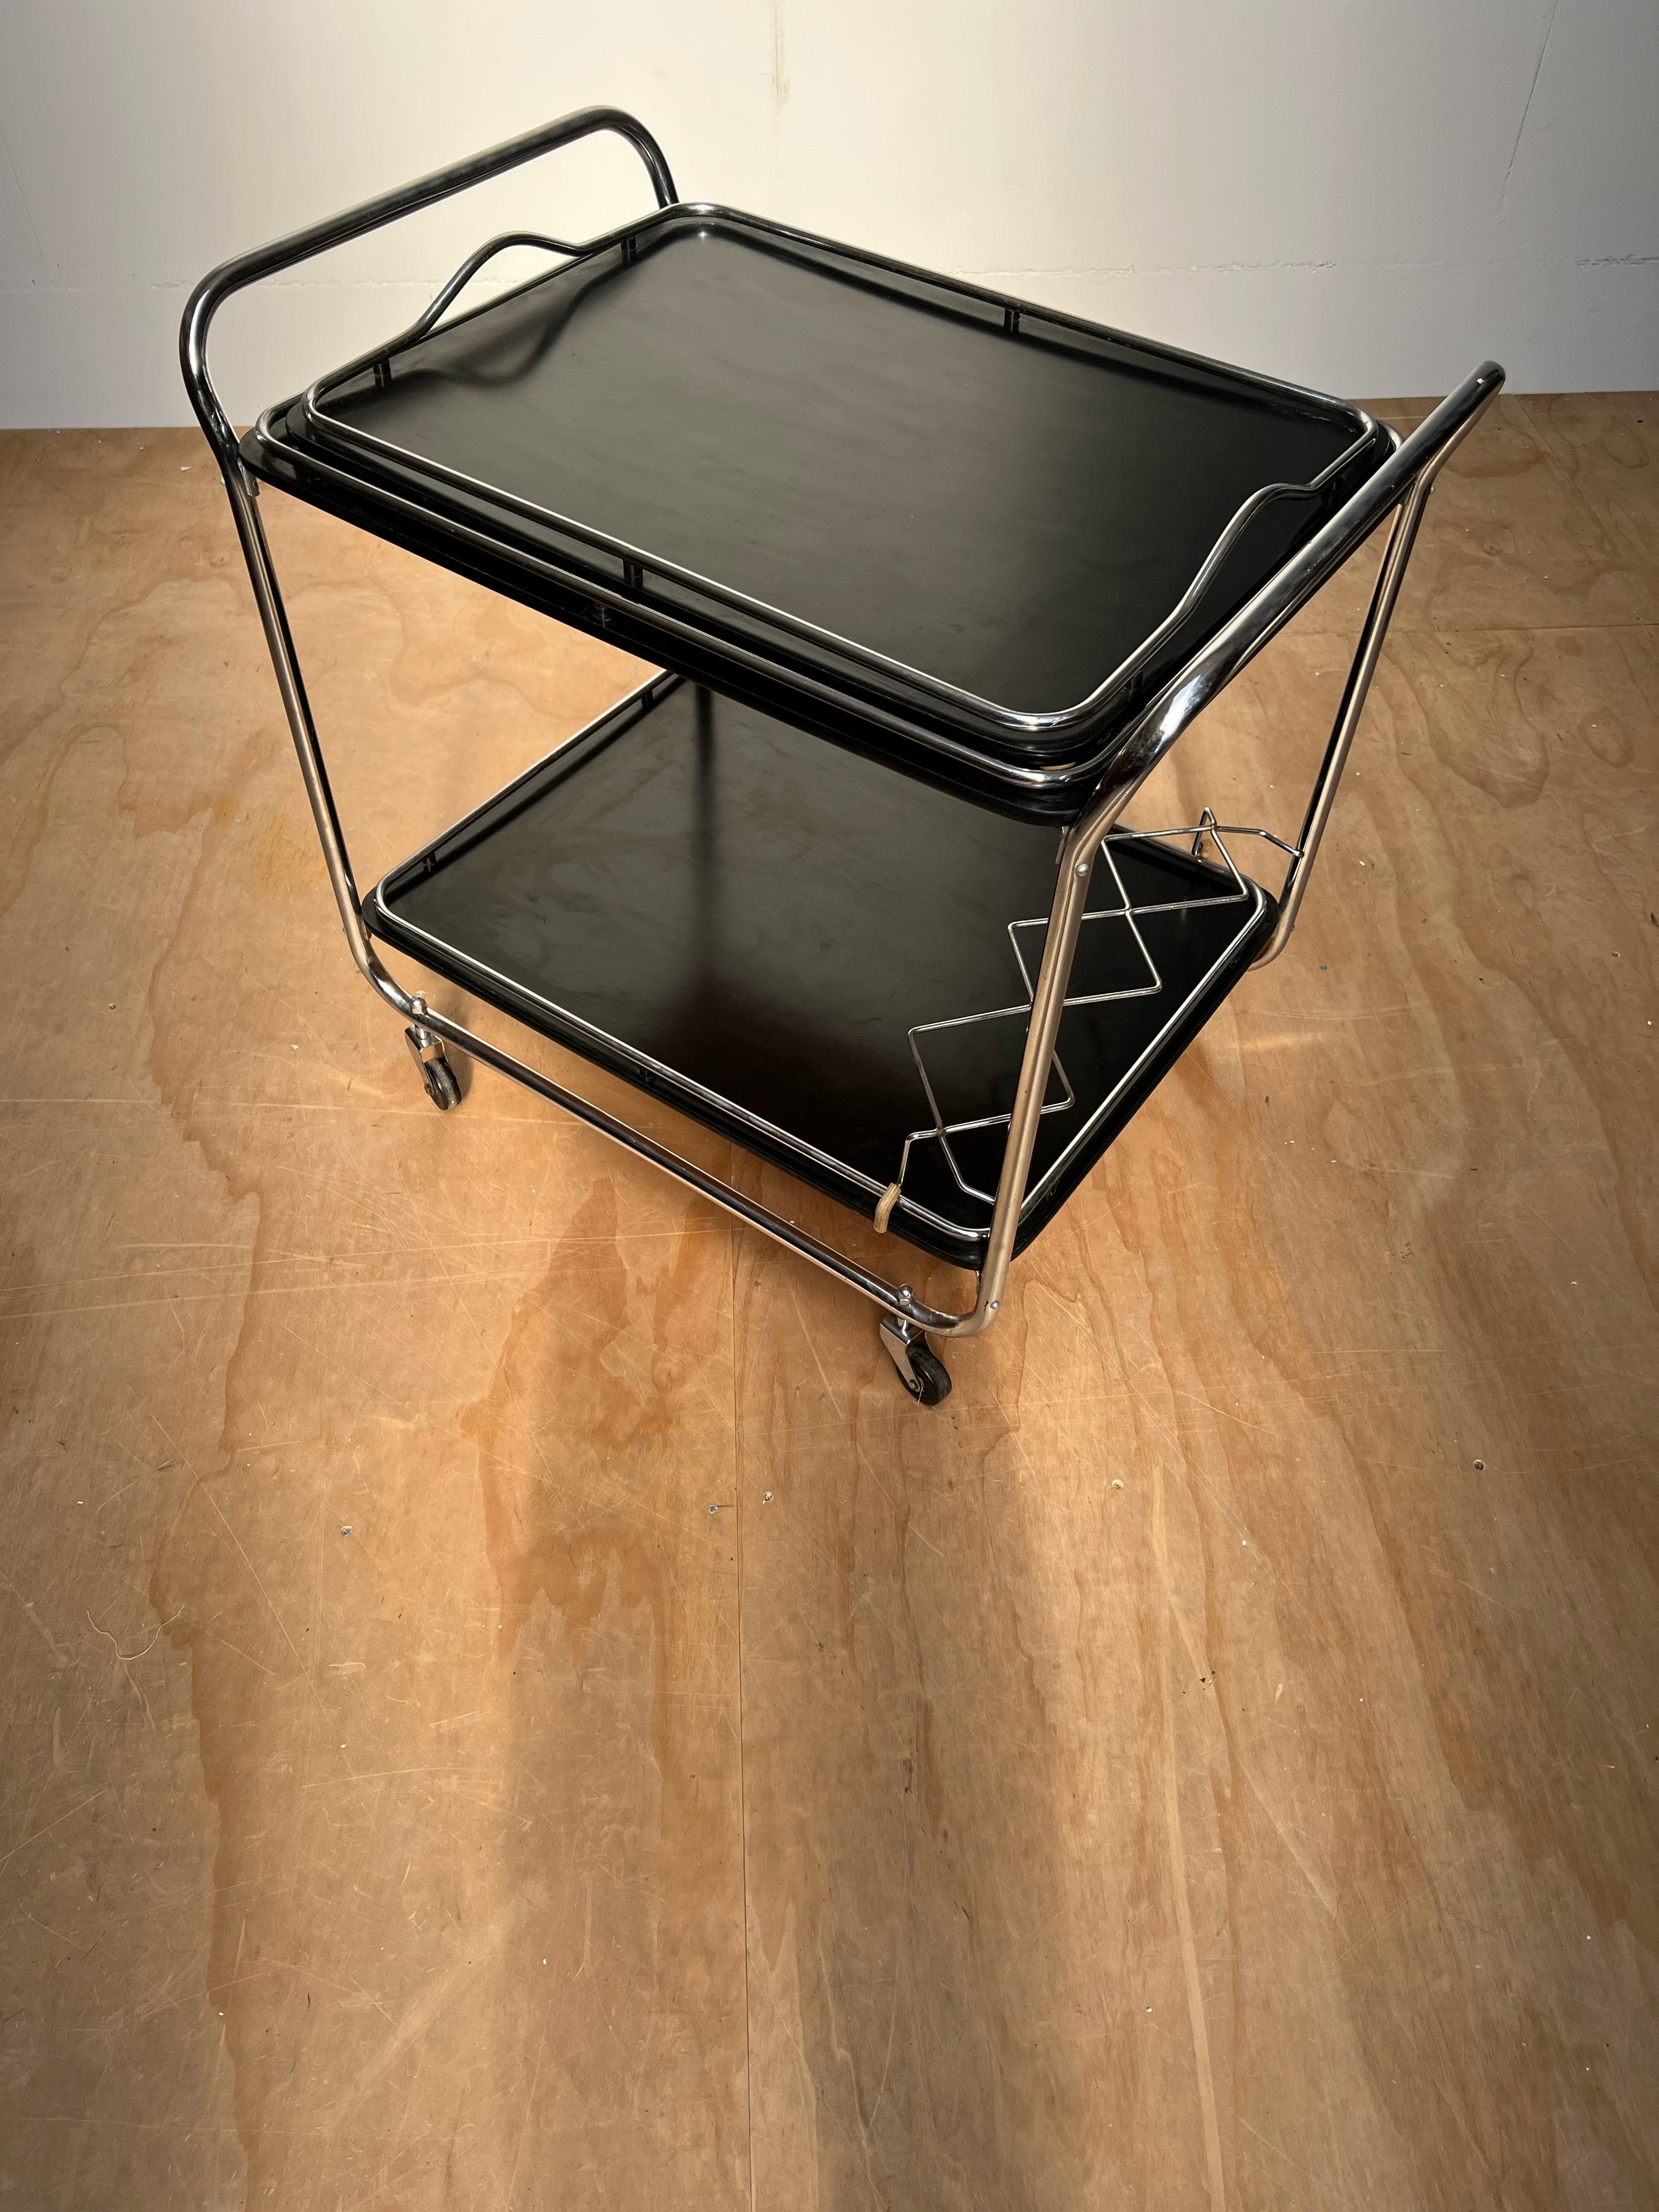 Midcentury Modern Drinks Trolley / Bar Cart w. Tray, Blackened Wood and Chrome For Sale 14